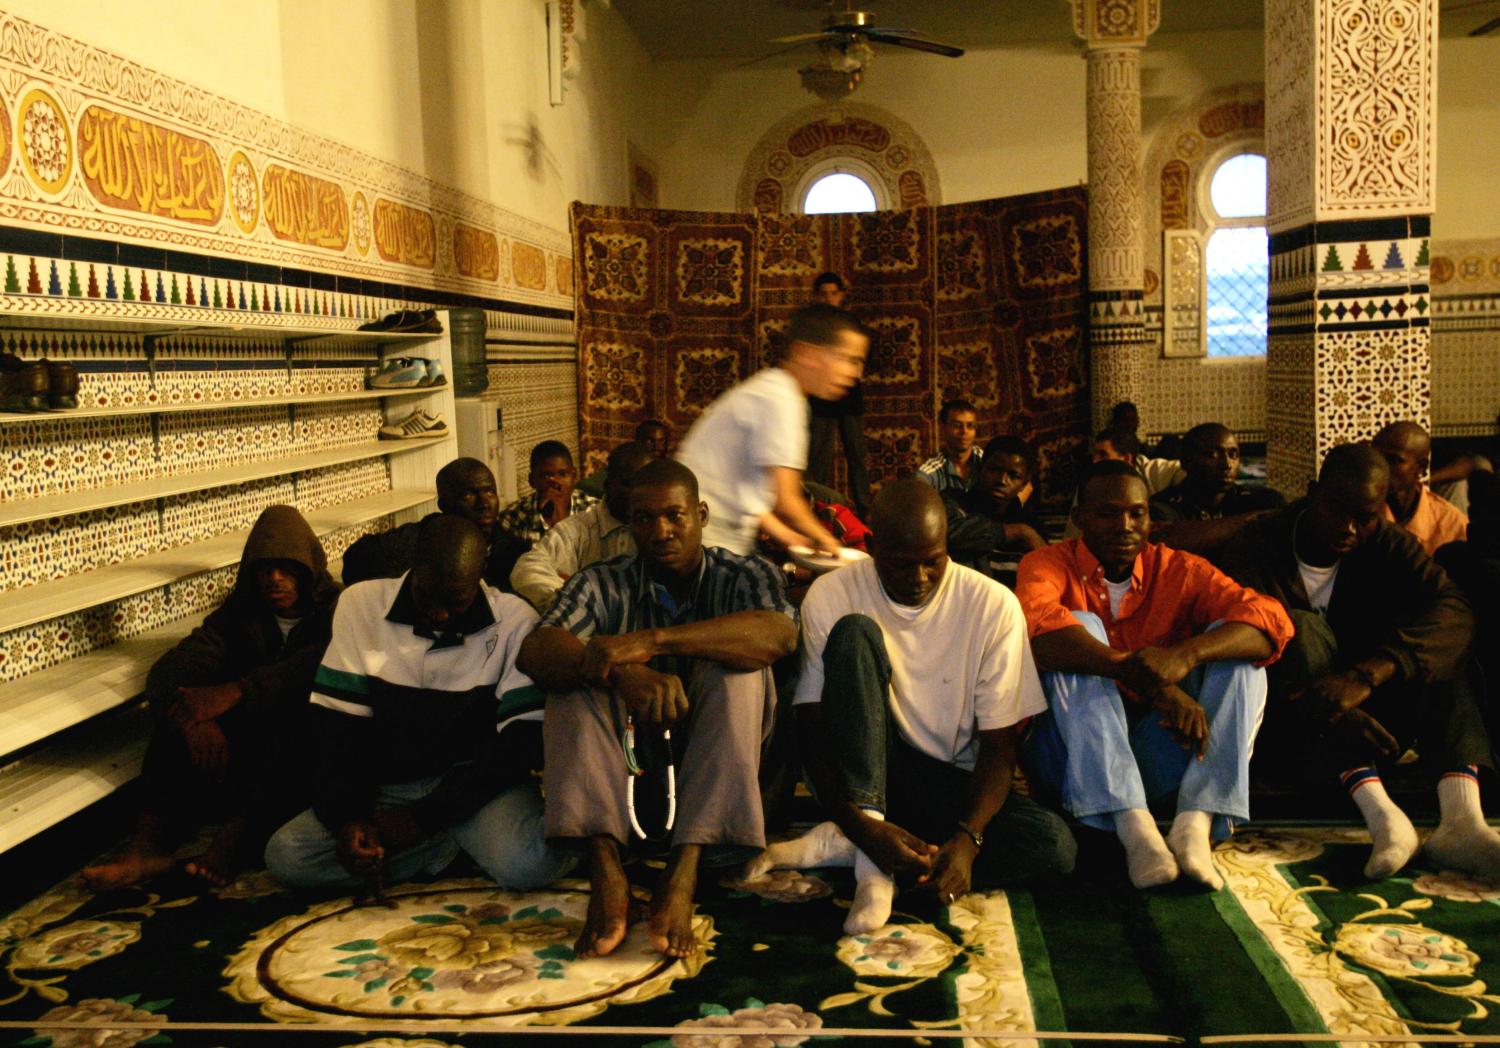 African would-be immigrants (front) pray inside a mosque near the CETI (Short-stay Immigrant Centre) during the fasting month of Ramadan in Spain's North African enclave of Melilla October 10, 2005. Morocco, under pressure to stem illegal immigration to Spain and accused by rights groups of mistreating migrants, began flying detained Africans to Senegal and Mali on Monday, government officials said. 'We have already flown 140 illegal migrants back home in Senegal this morning and we are preparing a flight of 140 others also to Senegal soon from Oujda,' a senior official told Reuters. REUTERS/Andrea Comas - RP2DSFIXLEAB